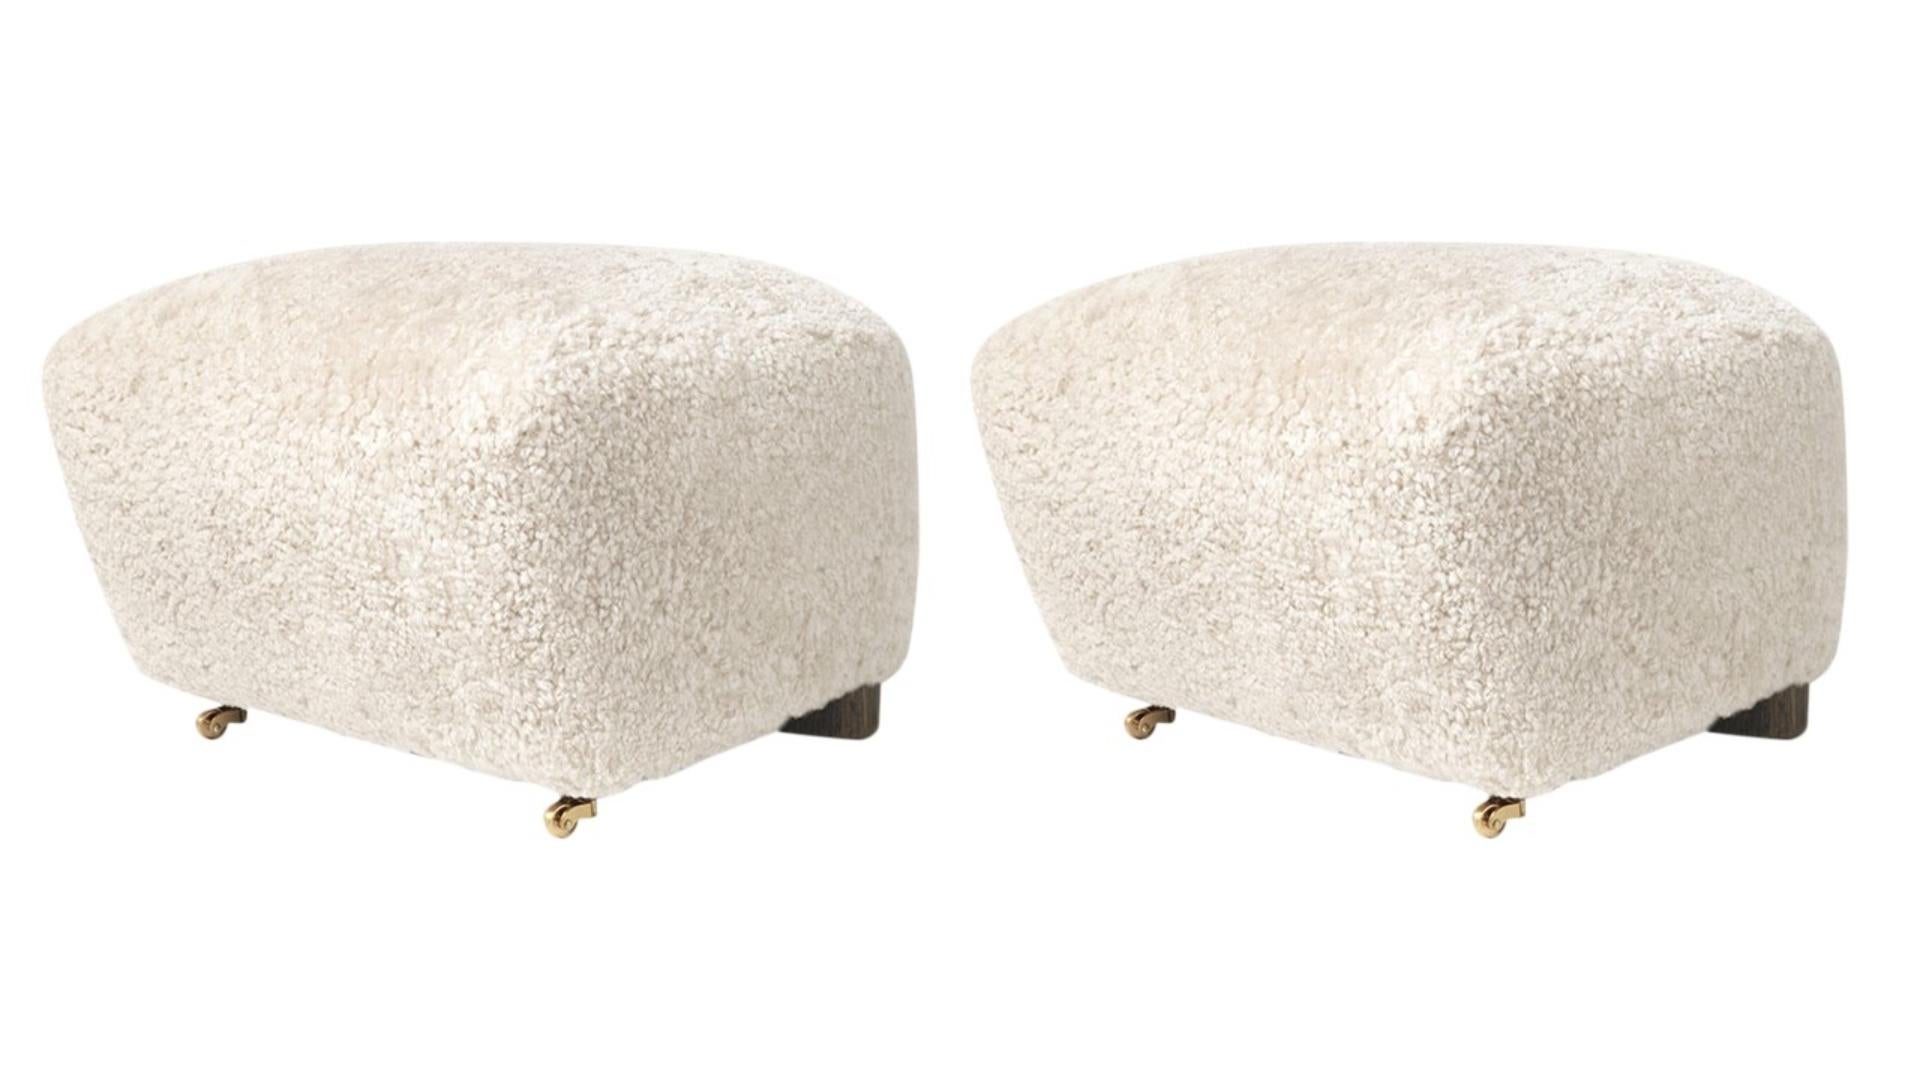 Set of 2 off white smoked oak sheepskin The Tired Man footstools by Lassen
Dimensions: W 55 x D 53 x H 36 cm 
Materials: Sheepskin

Flemming Lassen designed the overstuffed easy chair, The Tired Man, for The Copenhagen Cabinetmakers’ Guild